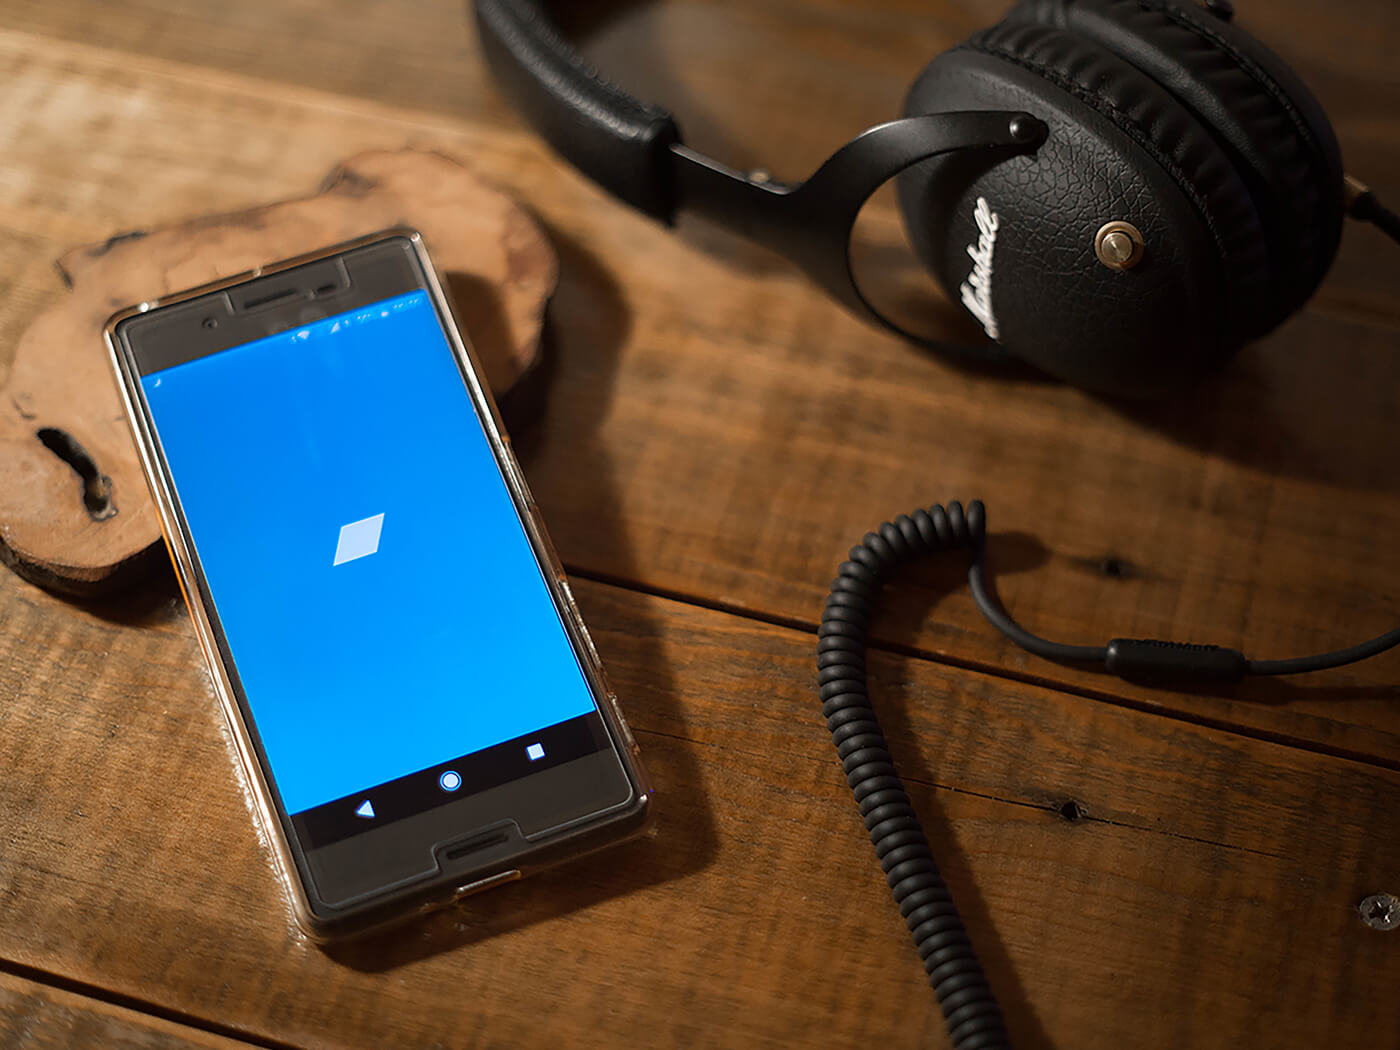 Bandcamp application on a smartphone, photo by Guillaume Payen/SOPA Images/LightRocket via Getty Images